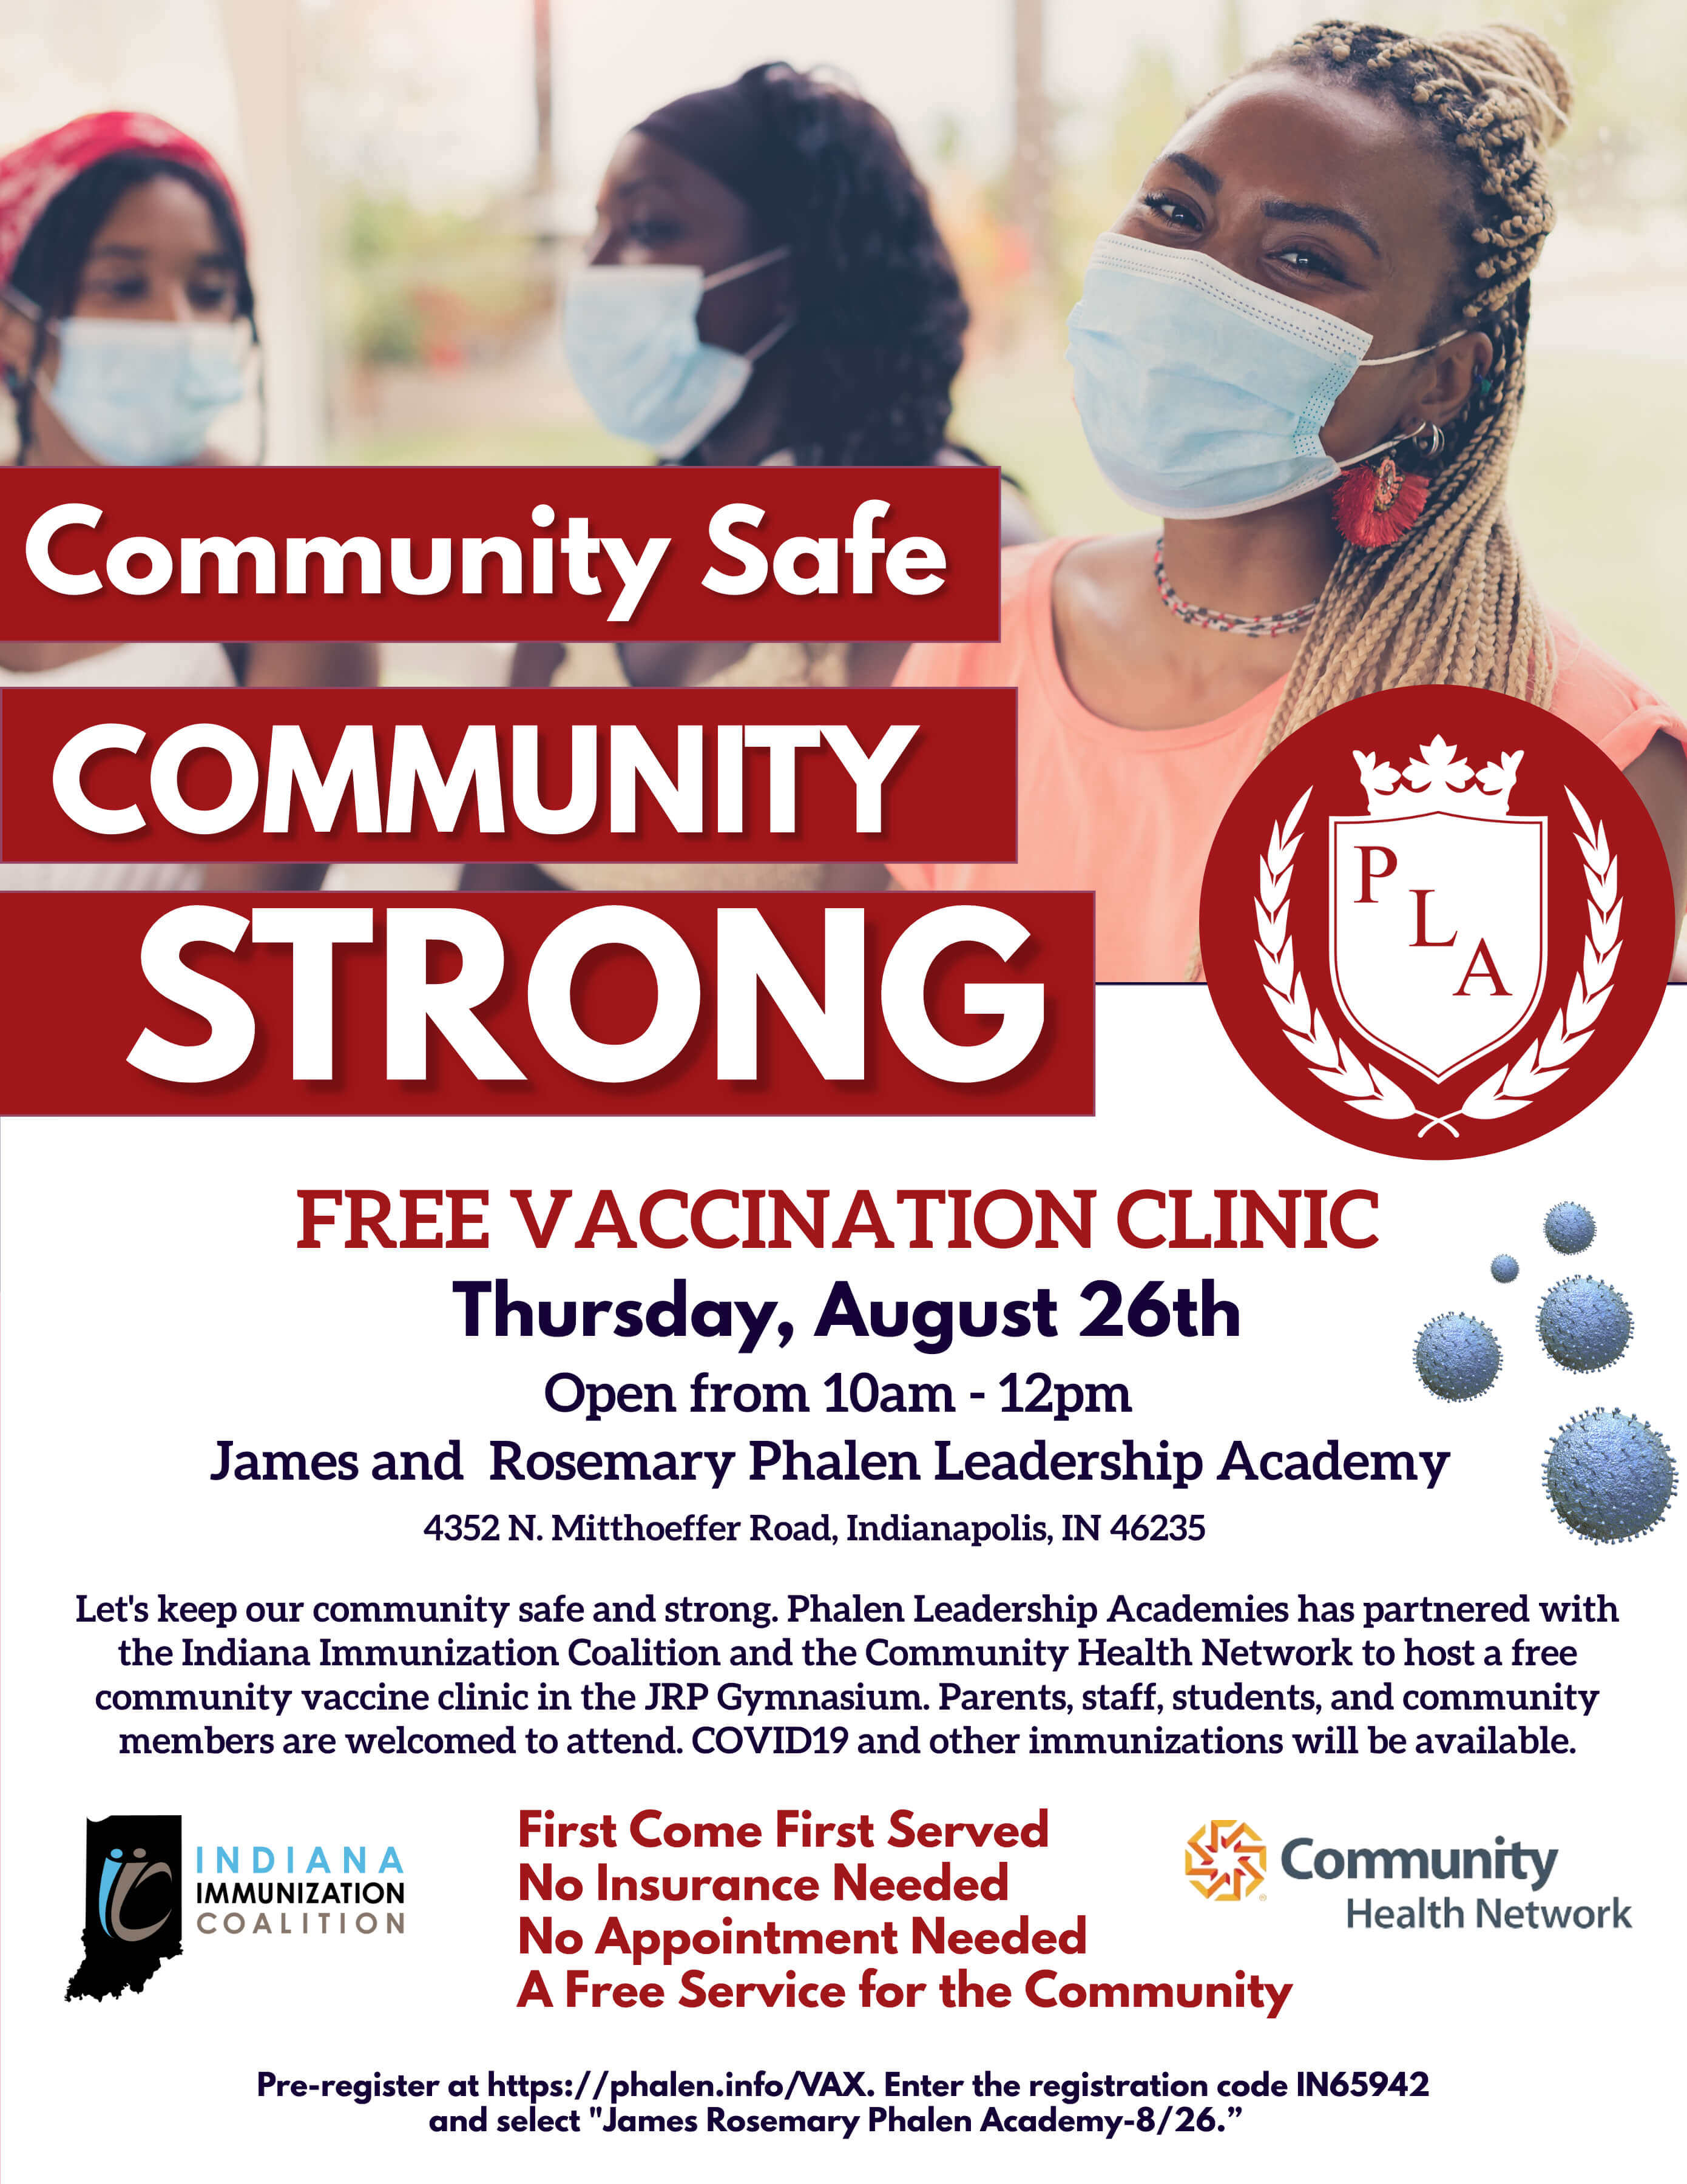 Phalen Leadership Academies (PLA) will host a free community vaccination clinic on Thursday, August 26th from 10am to 12pm in partnership with the Indiana Immunization Coalition and the Community Health Network.